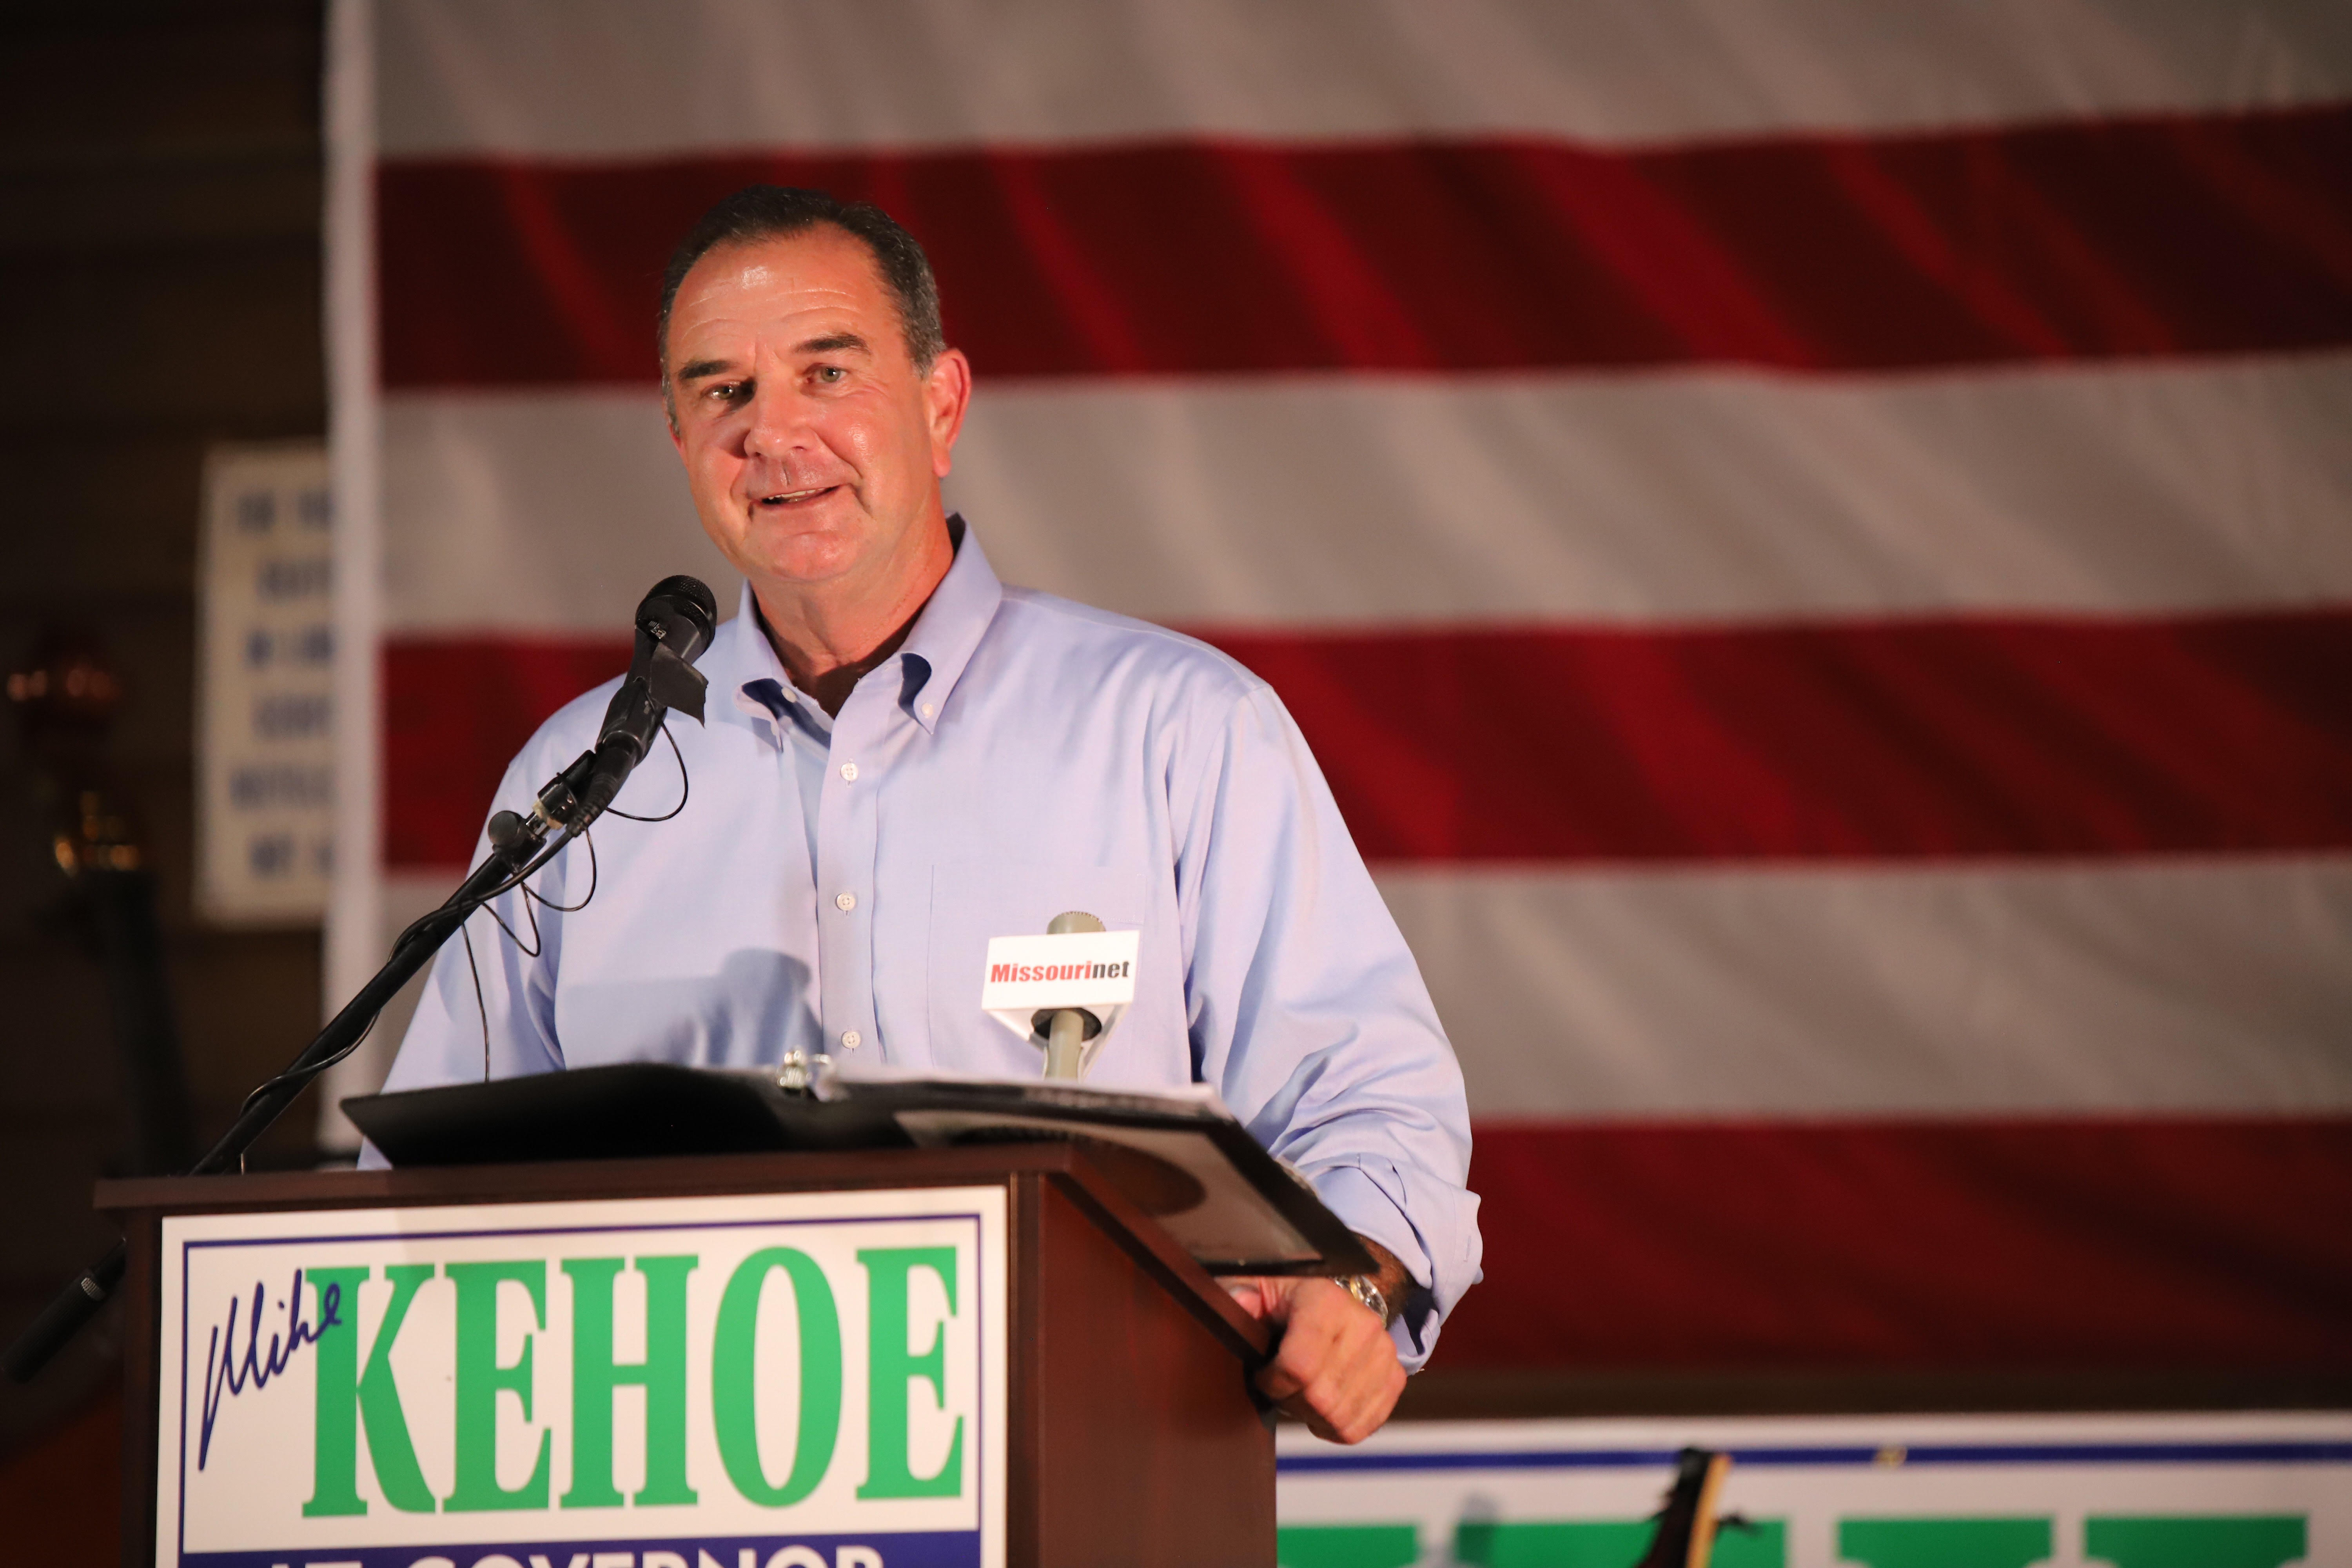 Mike Kehoe - Conservative Champion - Liberty Alliance